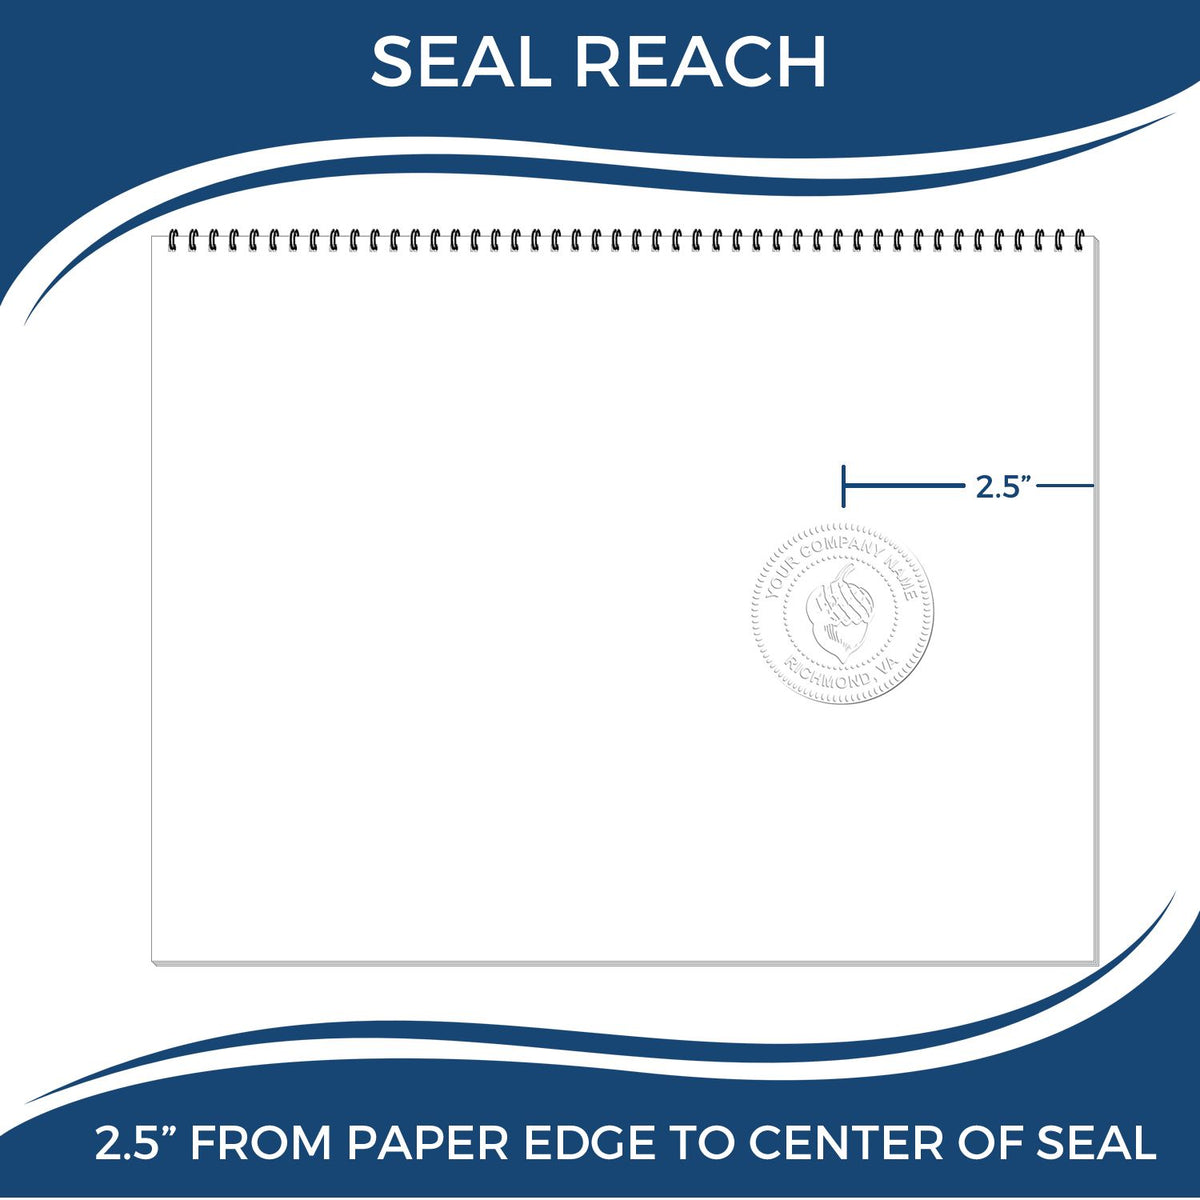 An infographic showing the seal reach which is represented by a ruler and a miniature seal image of the Long Reach Illinois PE Seal